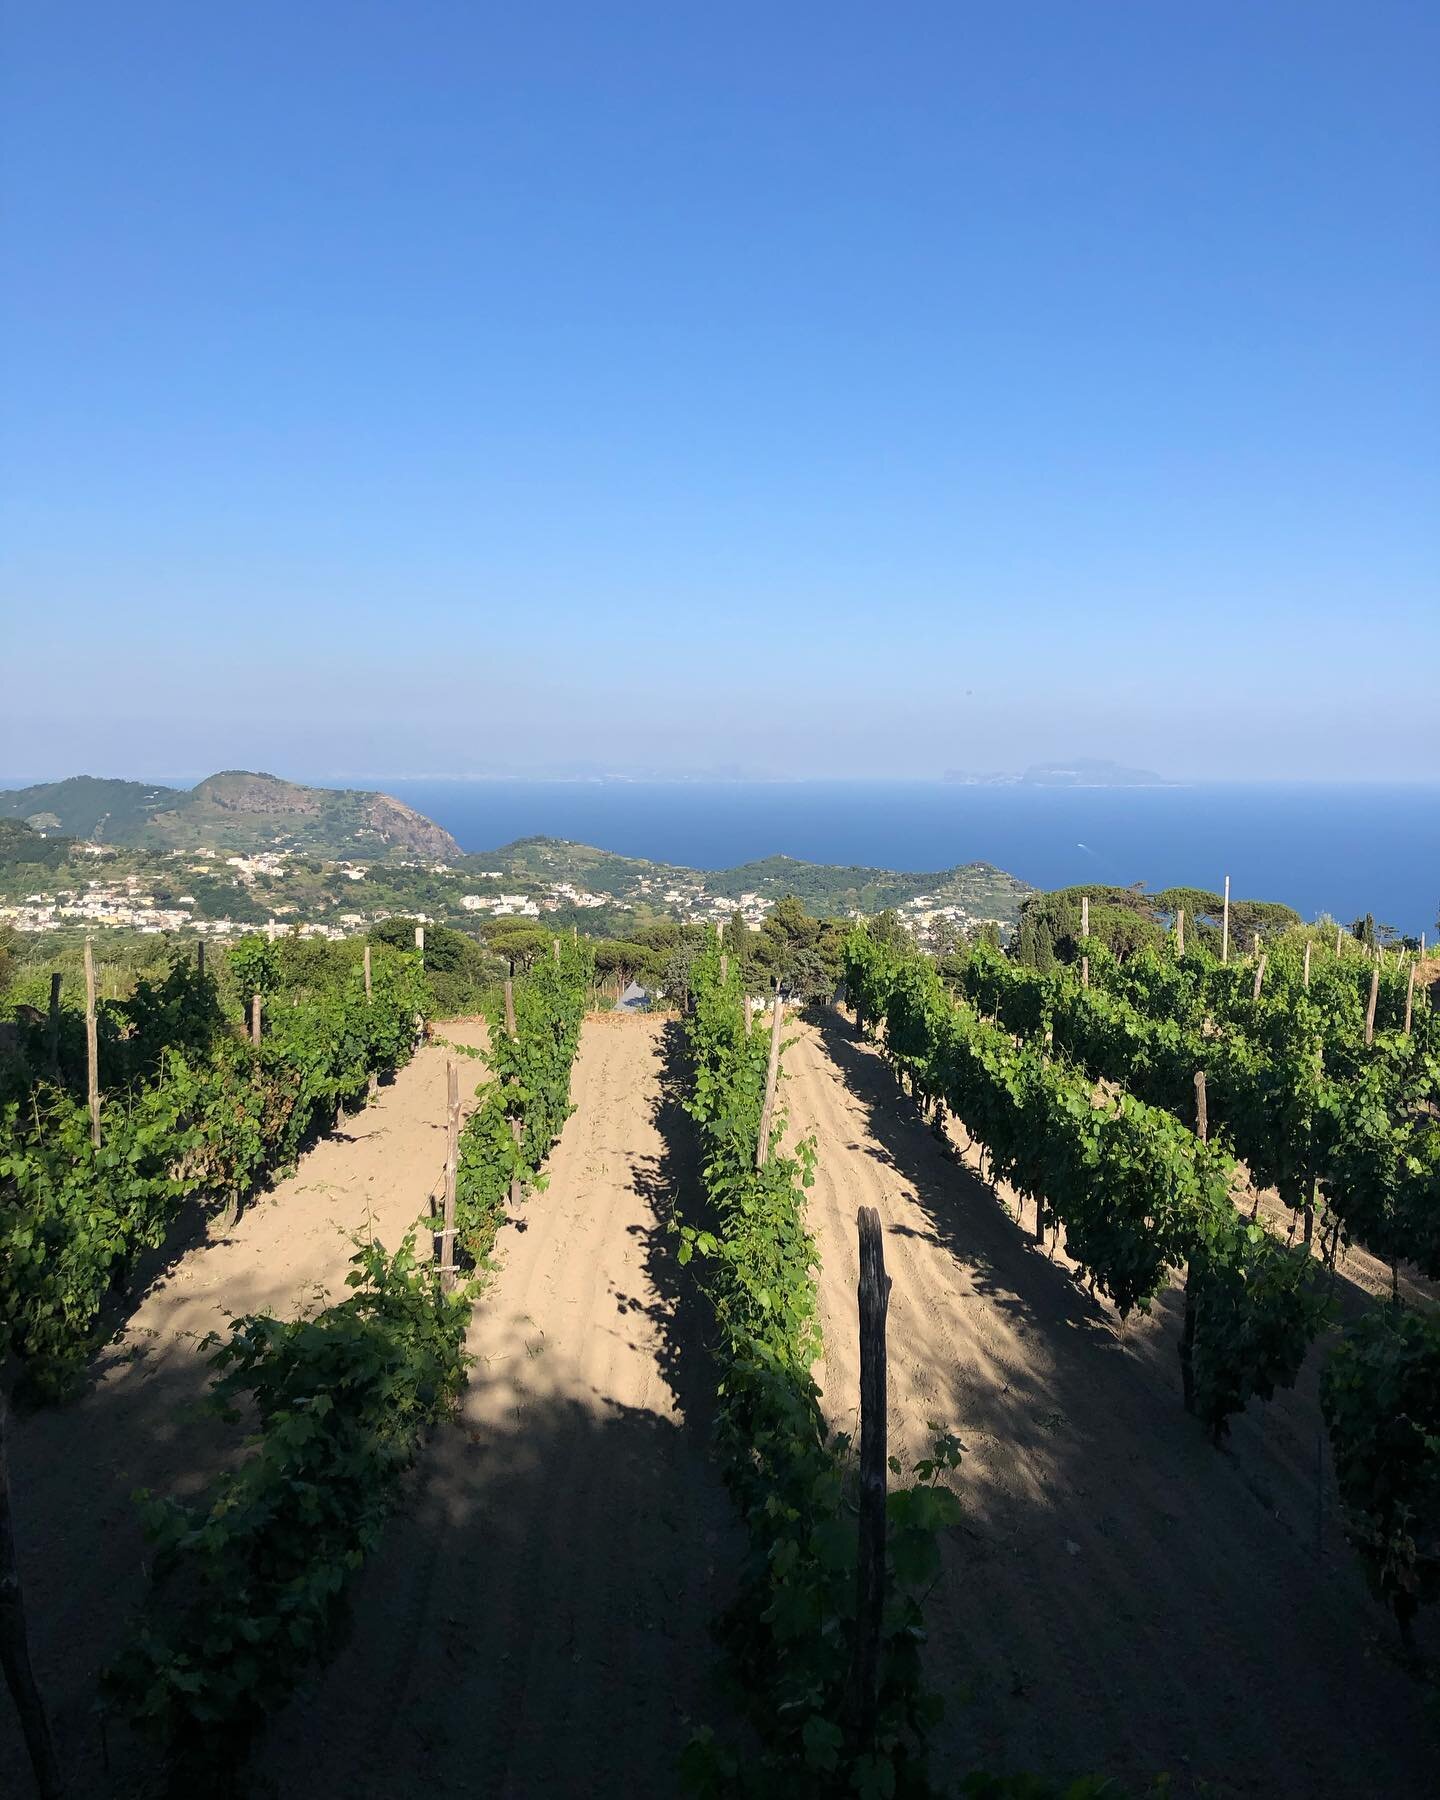 A wonderful visit with Pasquale and Federica learning about the long history of winemaking on the Island of Ischia.  As recently as seventy years ago this volcanic island in the bay of Naples had 3000 hectares (7500 acres) planted to vineyards, now t